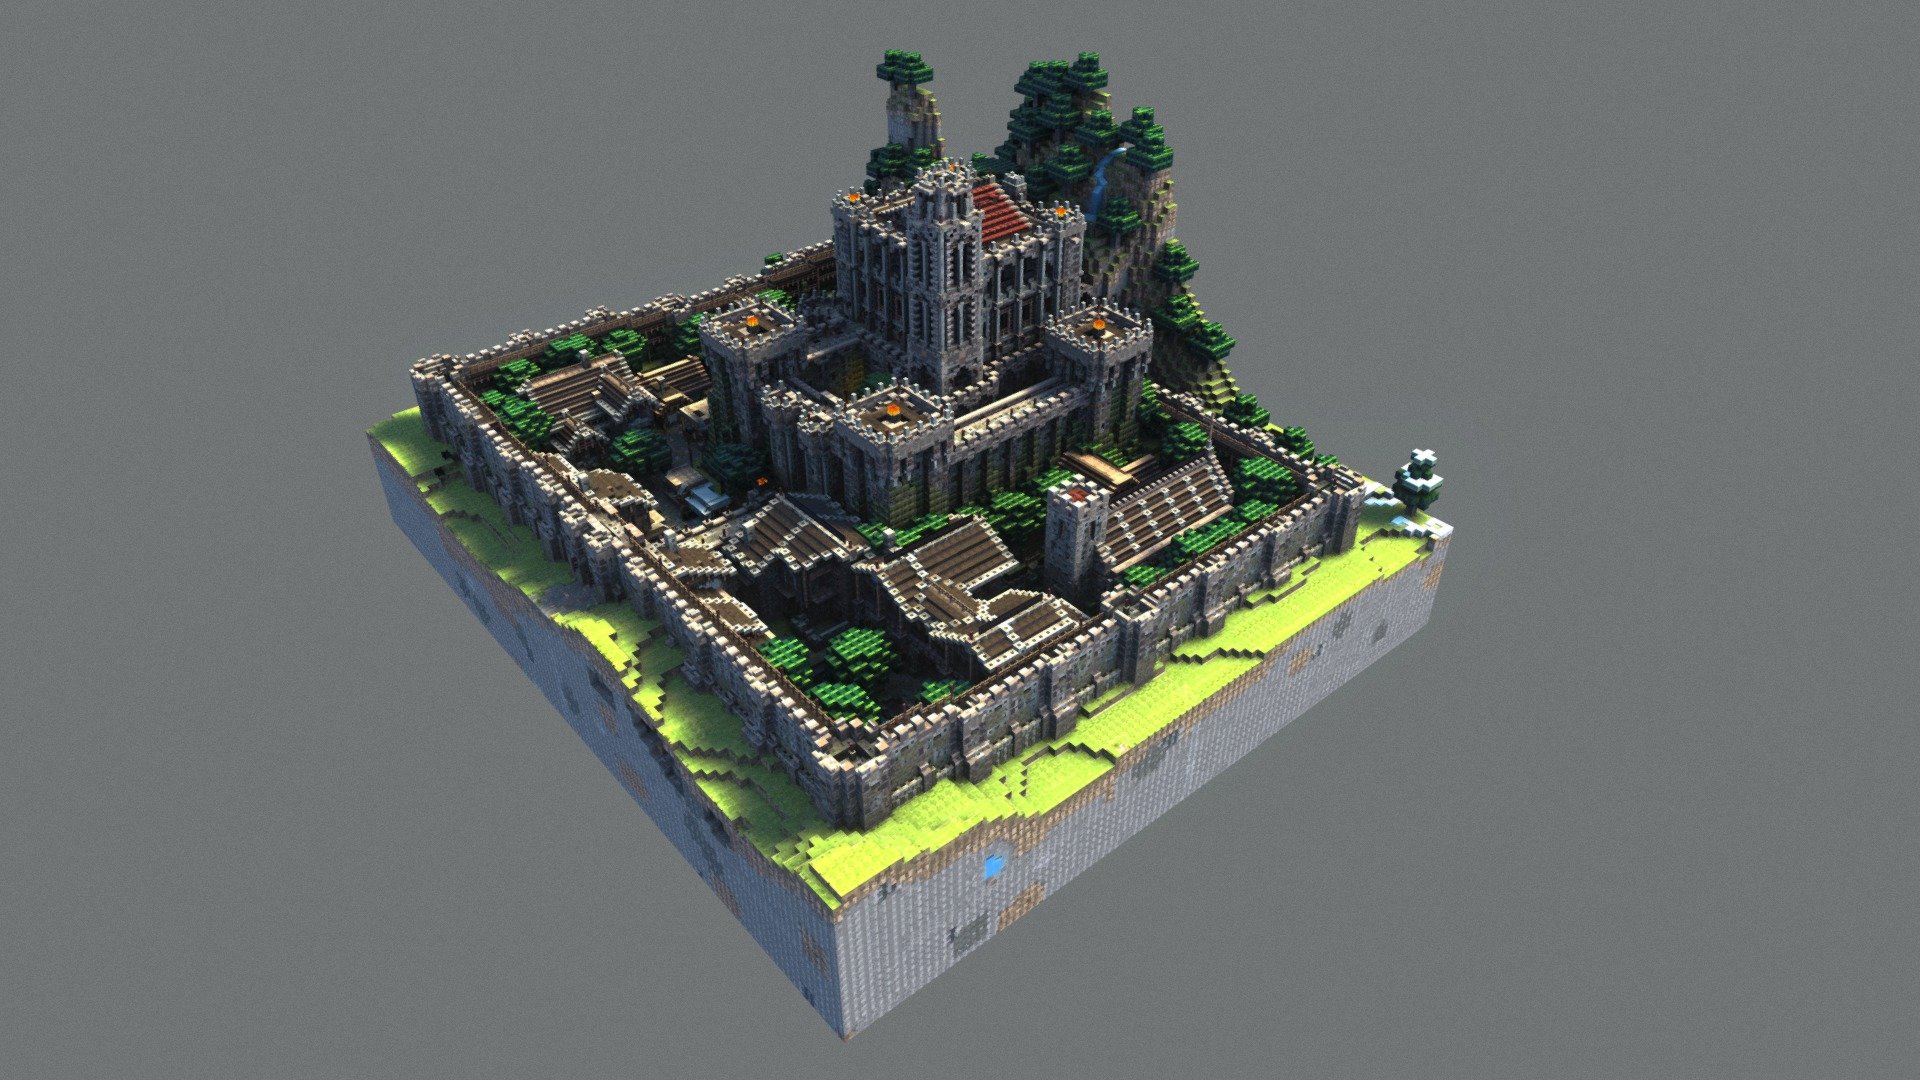 Export my castle build to obj, unwrap UV in ZBrush using PUV method, rendered diffuse, AO, lighting texture in 3ds Max.

Map download:
http://www.mediafire.com/download/bno6m1ulagn091e

minecraft 1.7+ with Conquest texturepack


Sketchfab doesn't pack manually uploaded textures when you download the file, so here's the download link to texturemap:

http://www.mediafire.com/view/xmjyktxe6svycq4/ - Minecraft Castle - Download Free 3D model by patrix 3d model